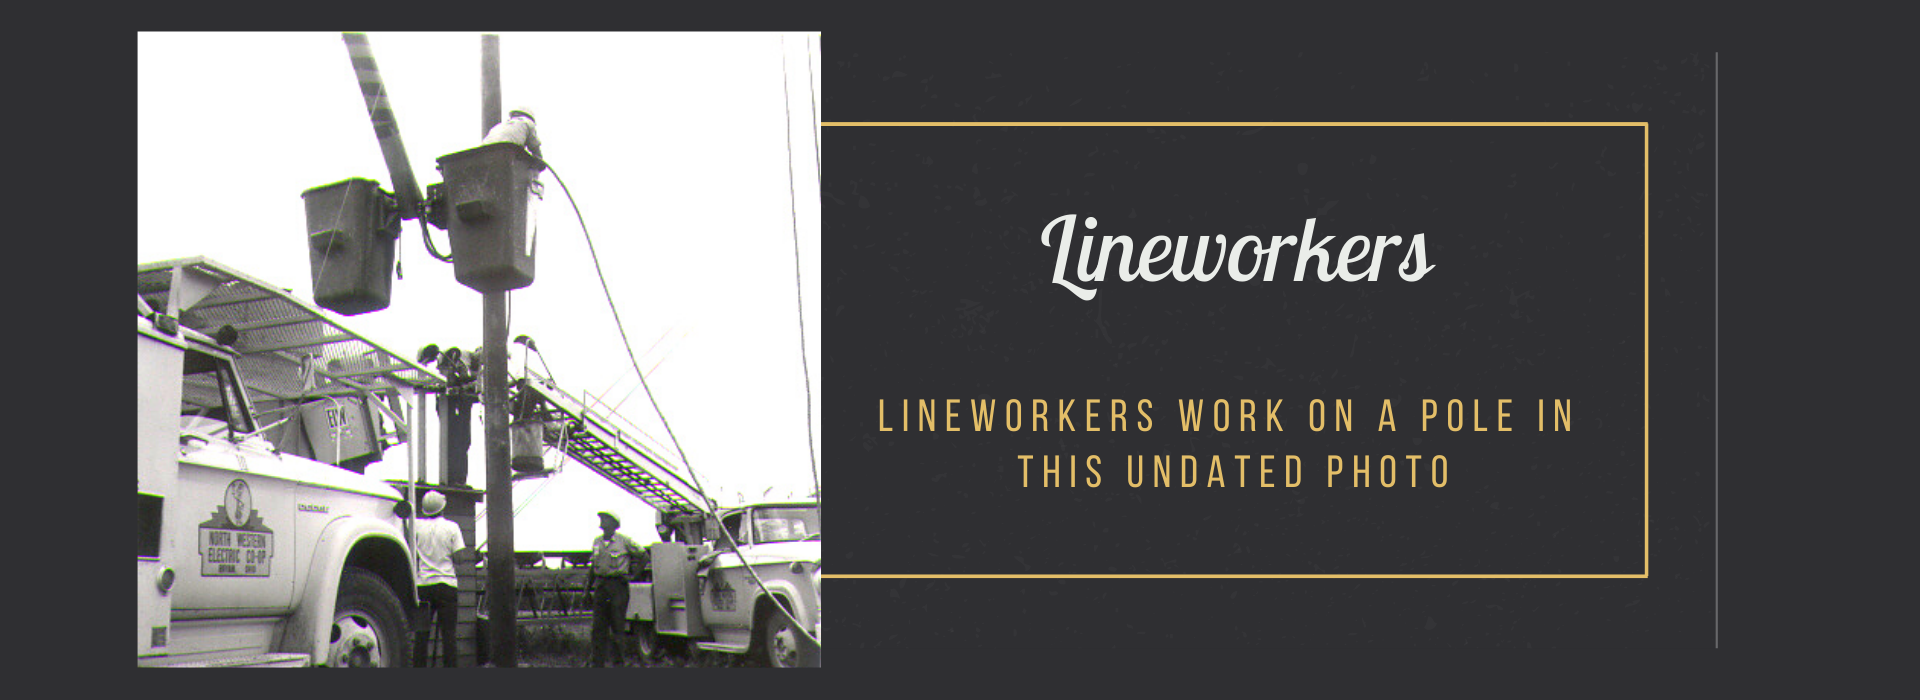 Lineworkers work on a pole in  this undated photo